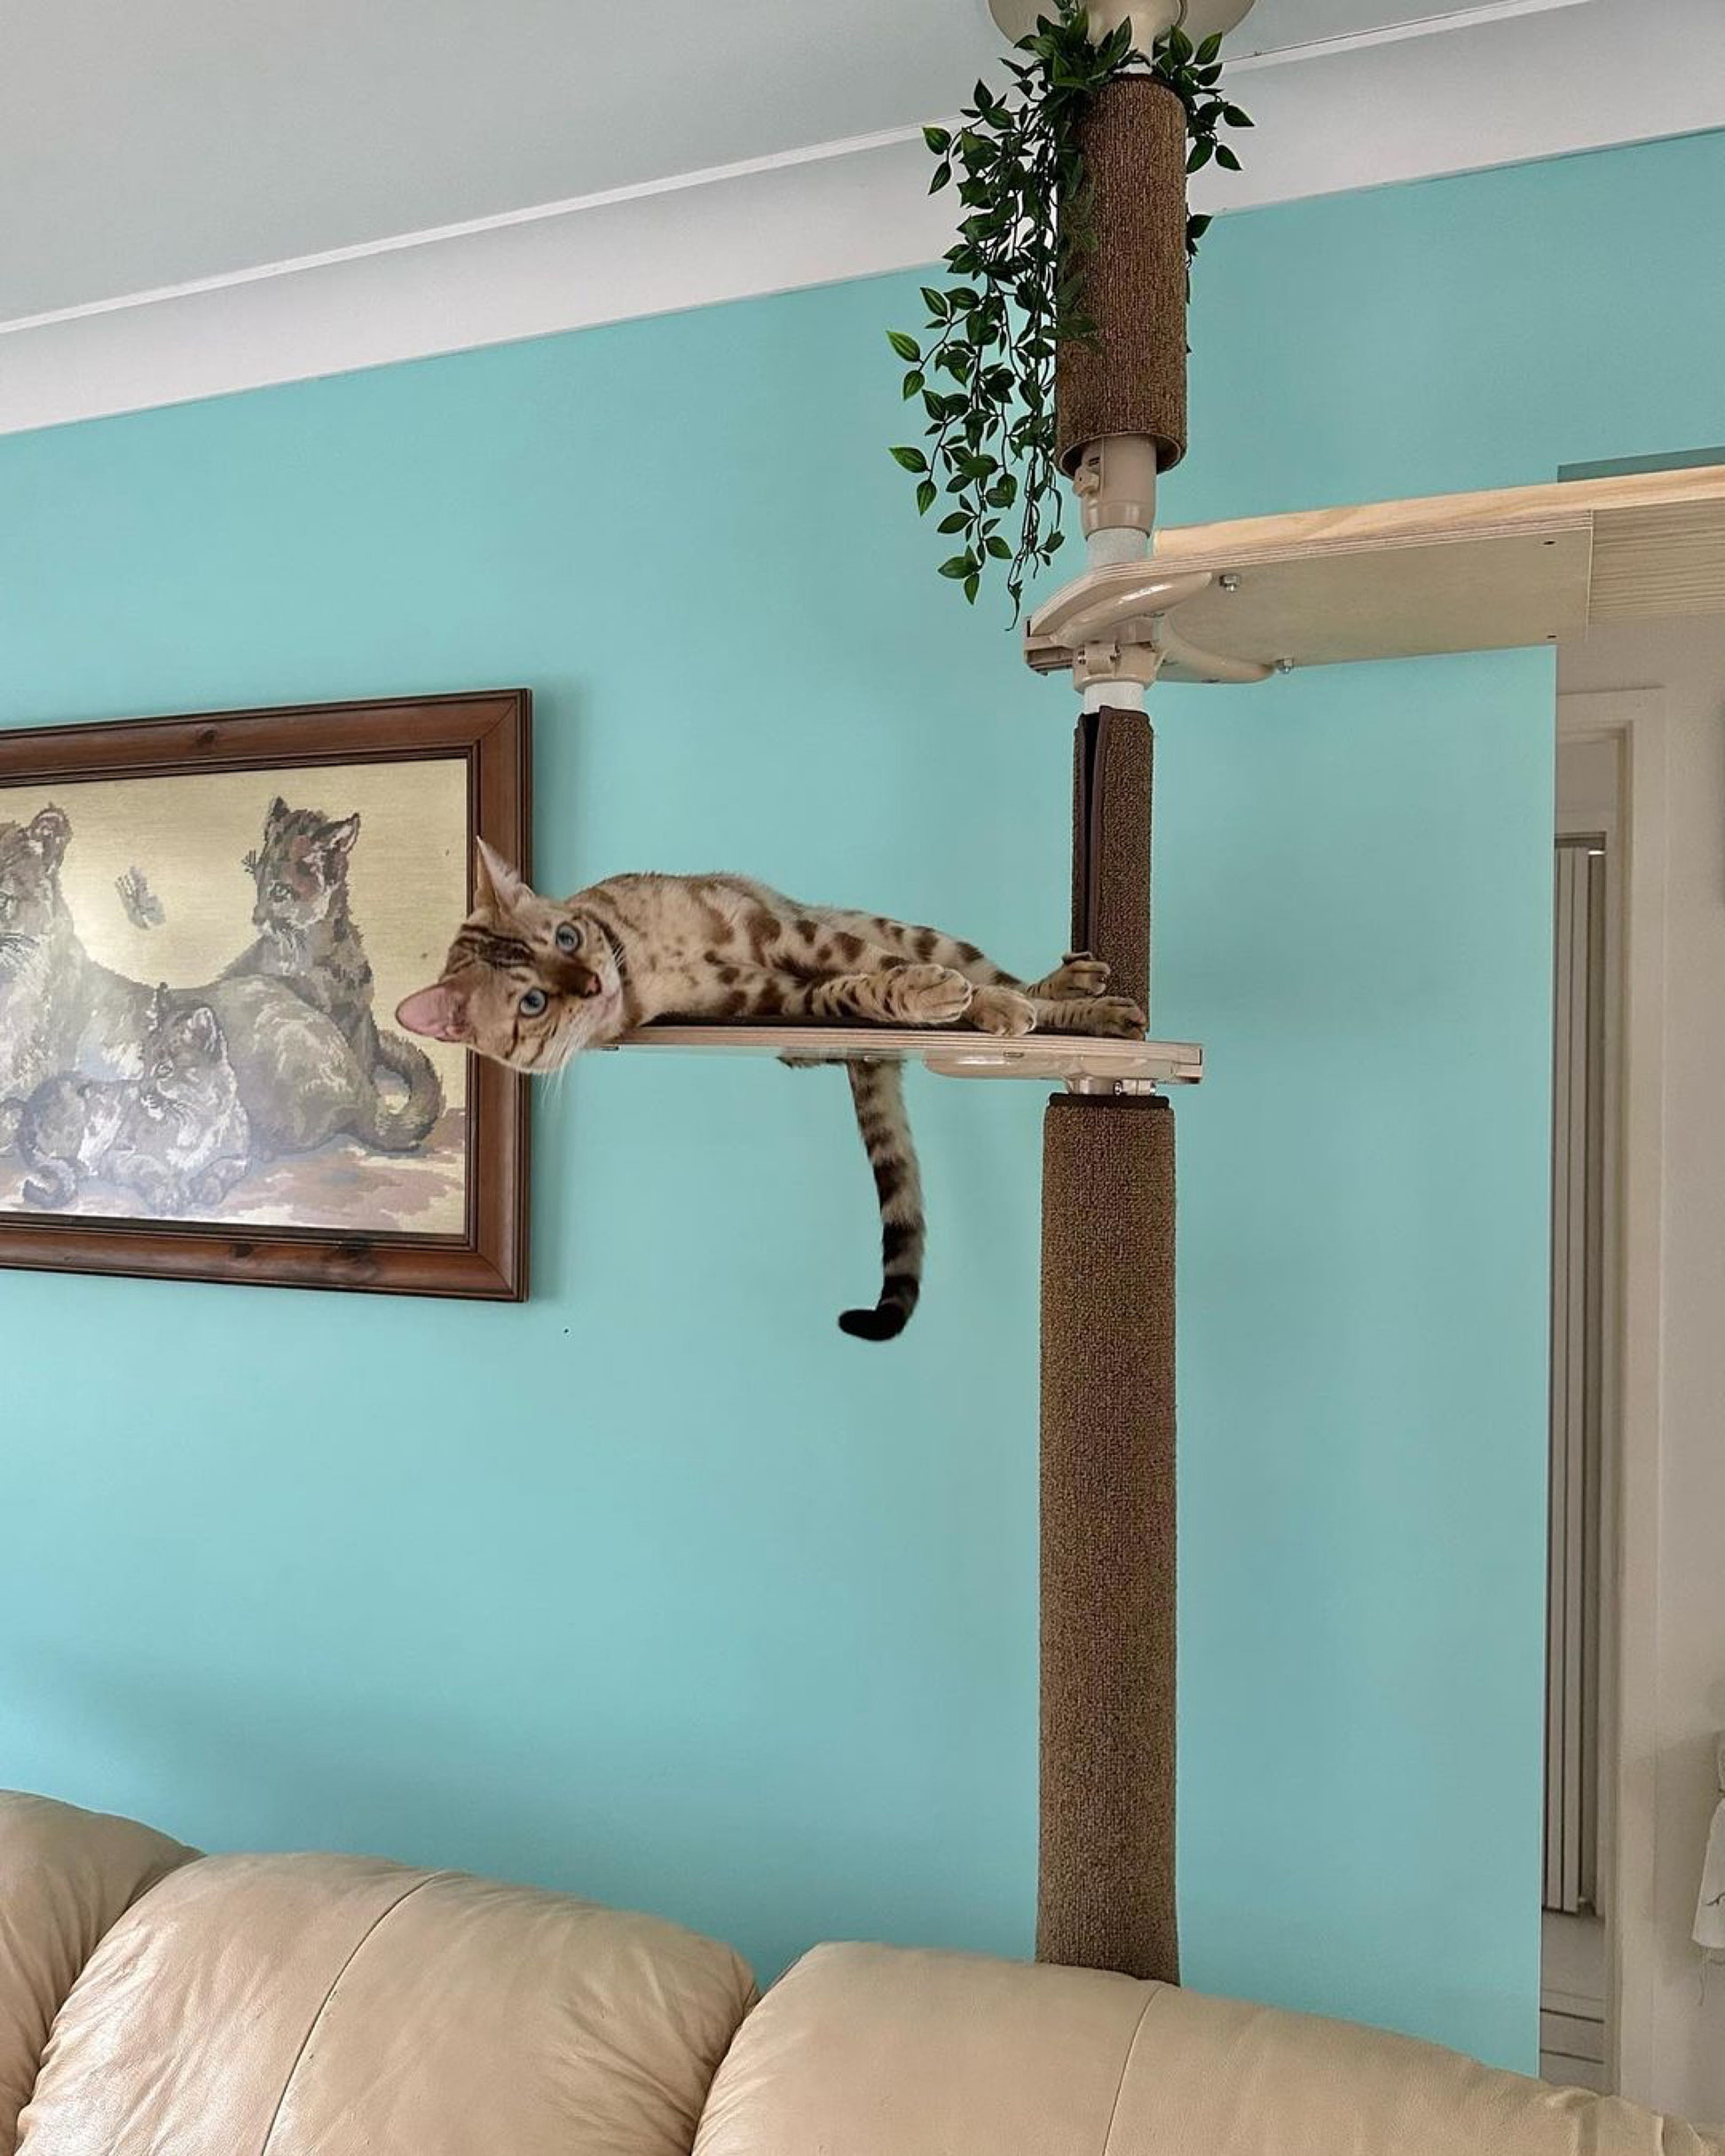 Compact cat tree for a multi-cat household